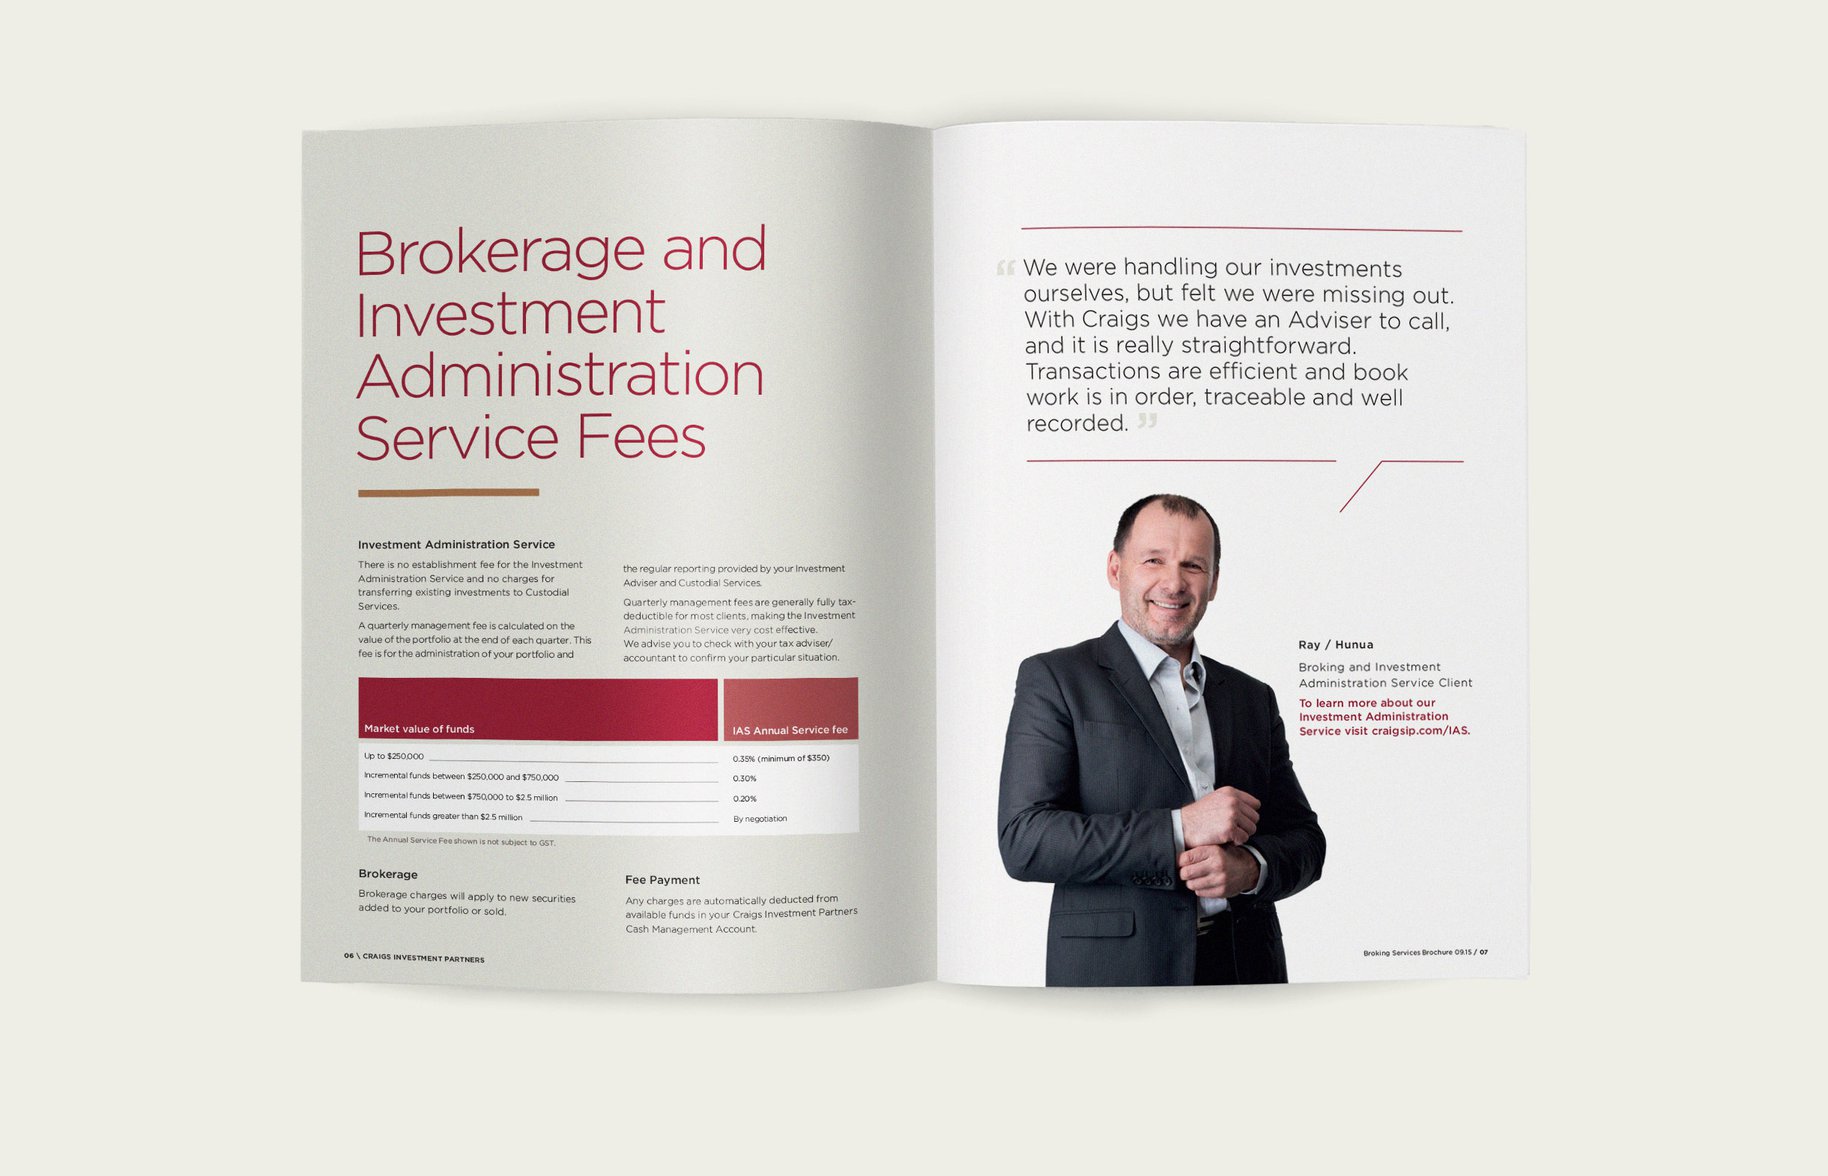 Craigs Investment Partners booklet spread